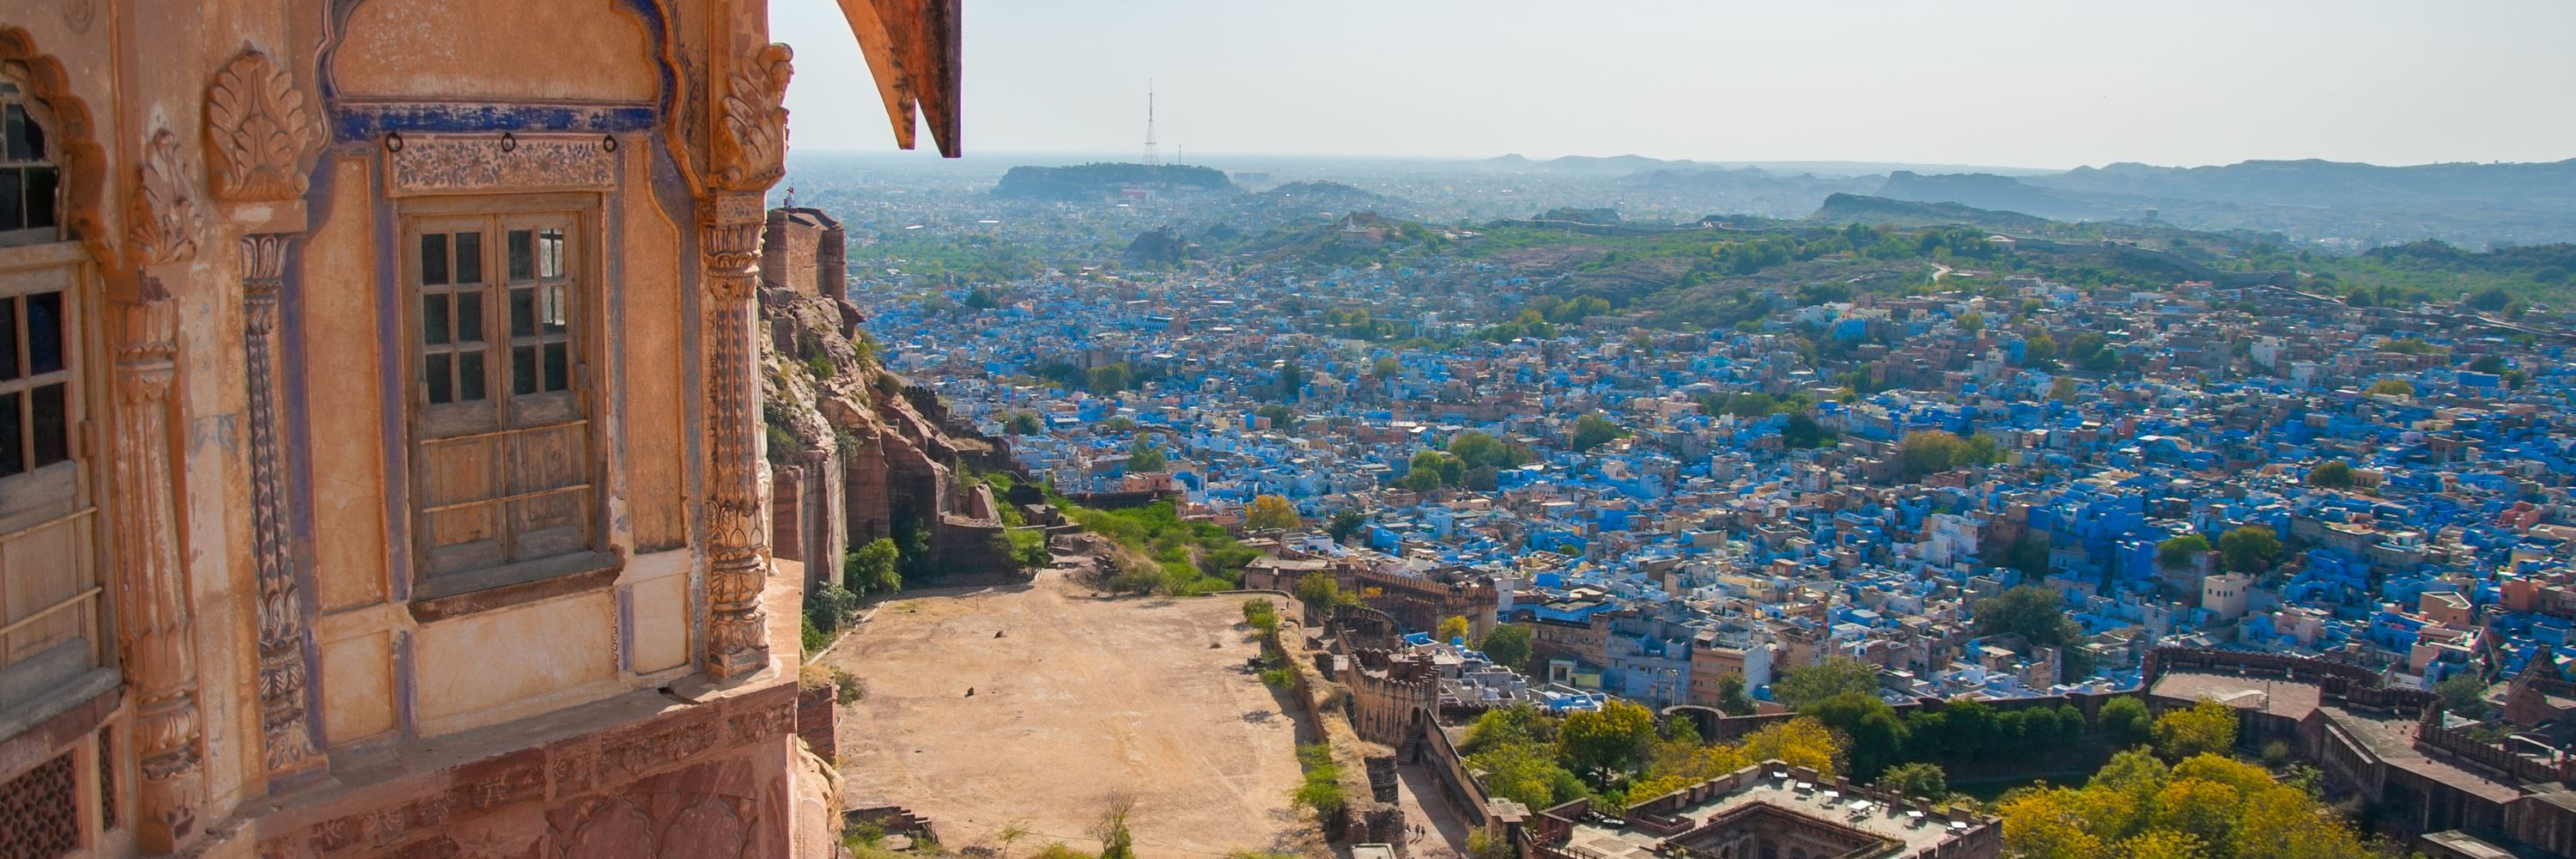 25 Best Places to Visit in Jodhpur Rajasthan | Tour My India